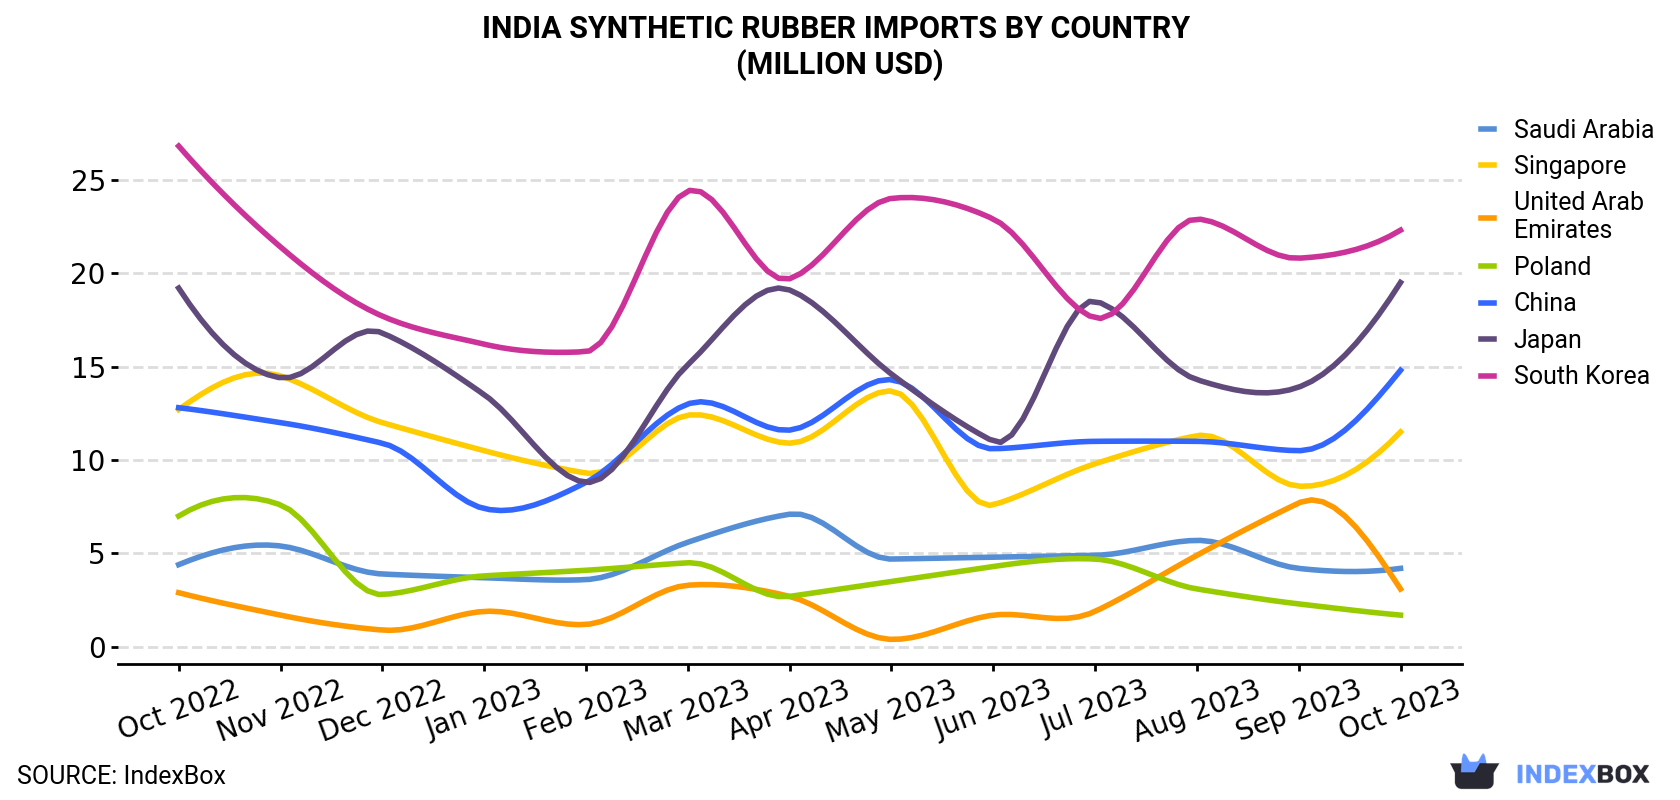 India Synthetic Rubber Imports By Country (Million USD)